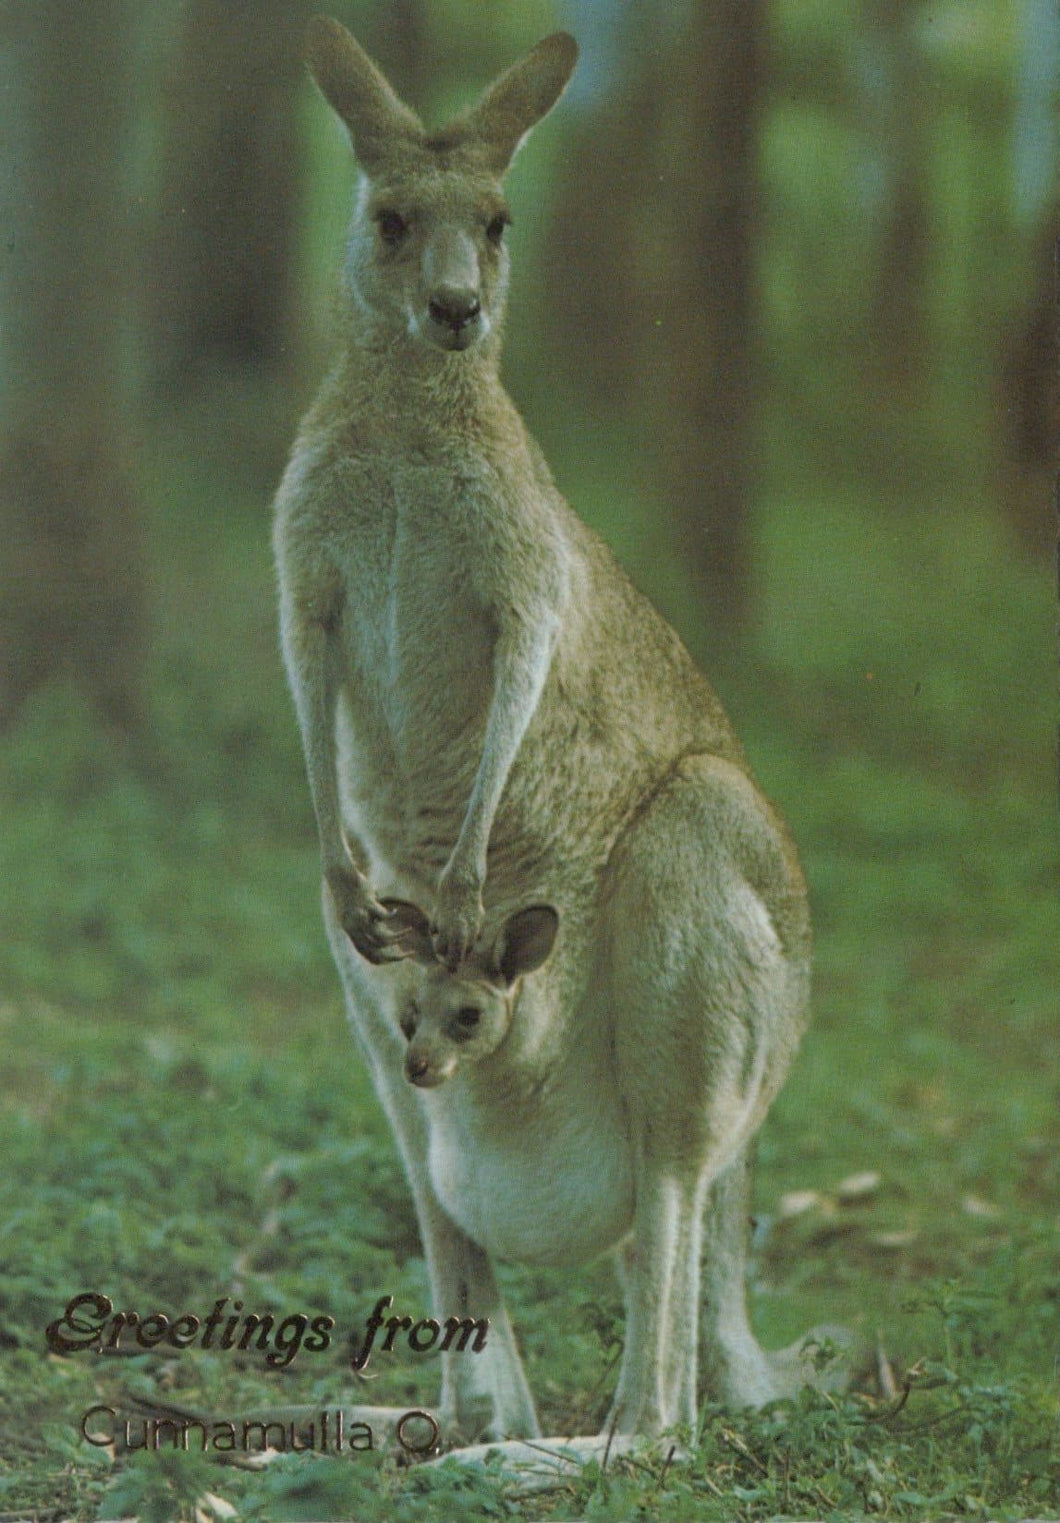 Animals Postcard - Australian Kangaroo With Joey - Greetings From Cunnamulla, Queensland - Mo’s Postcards 